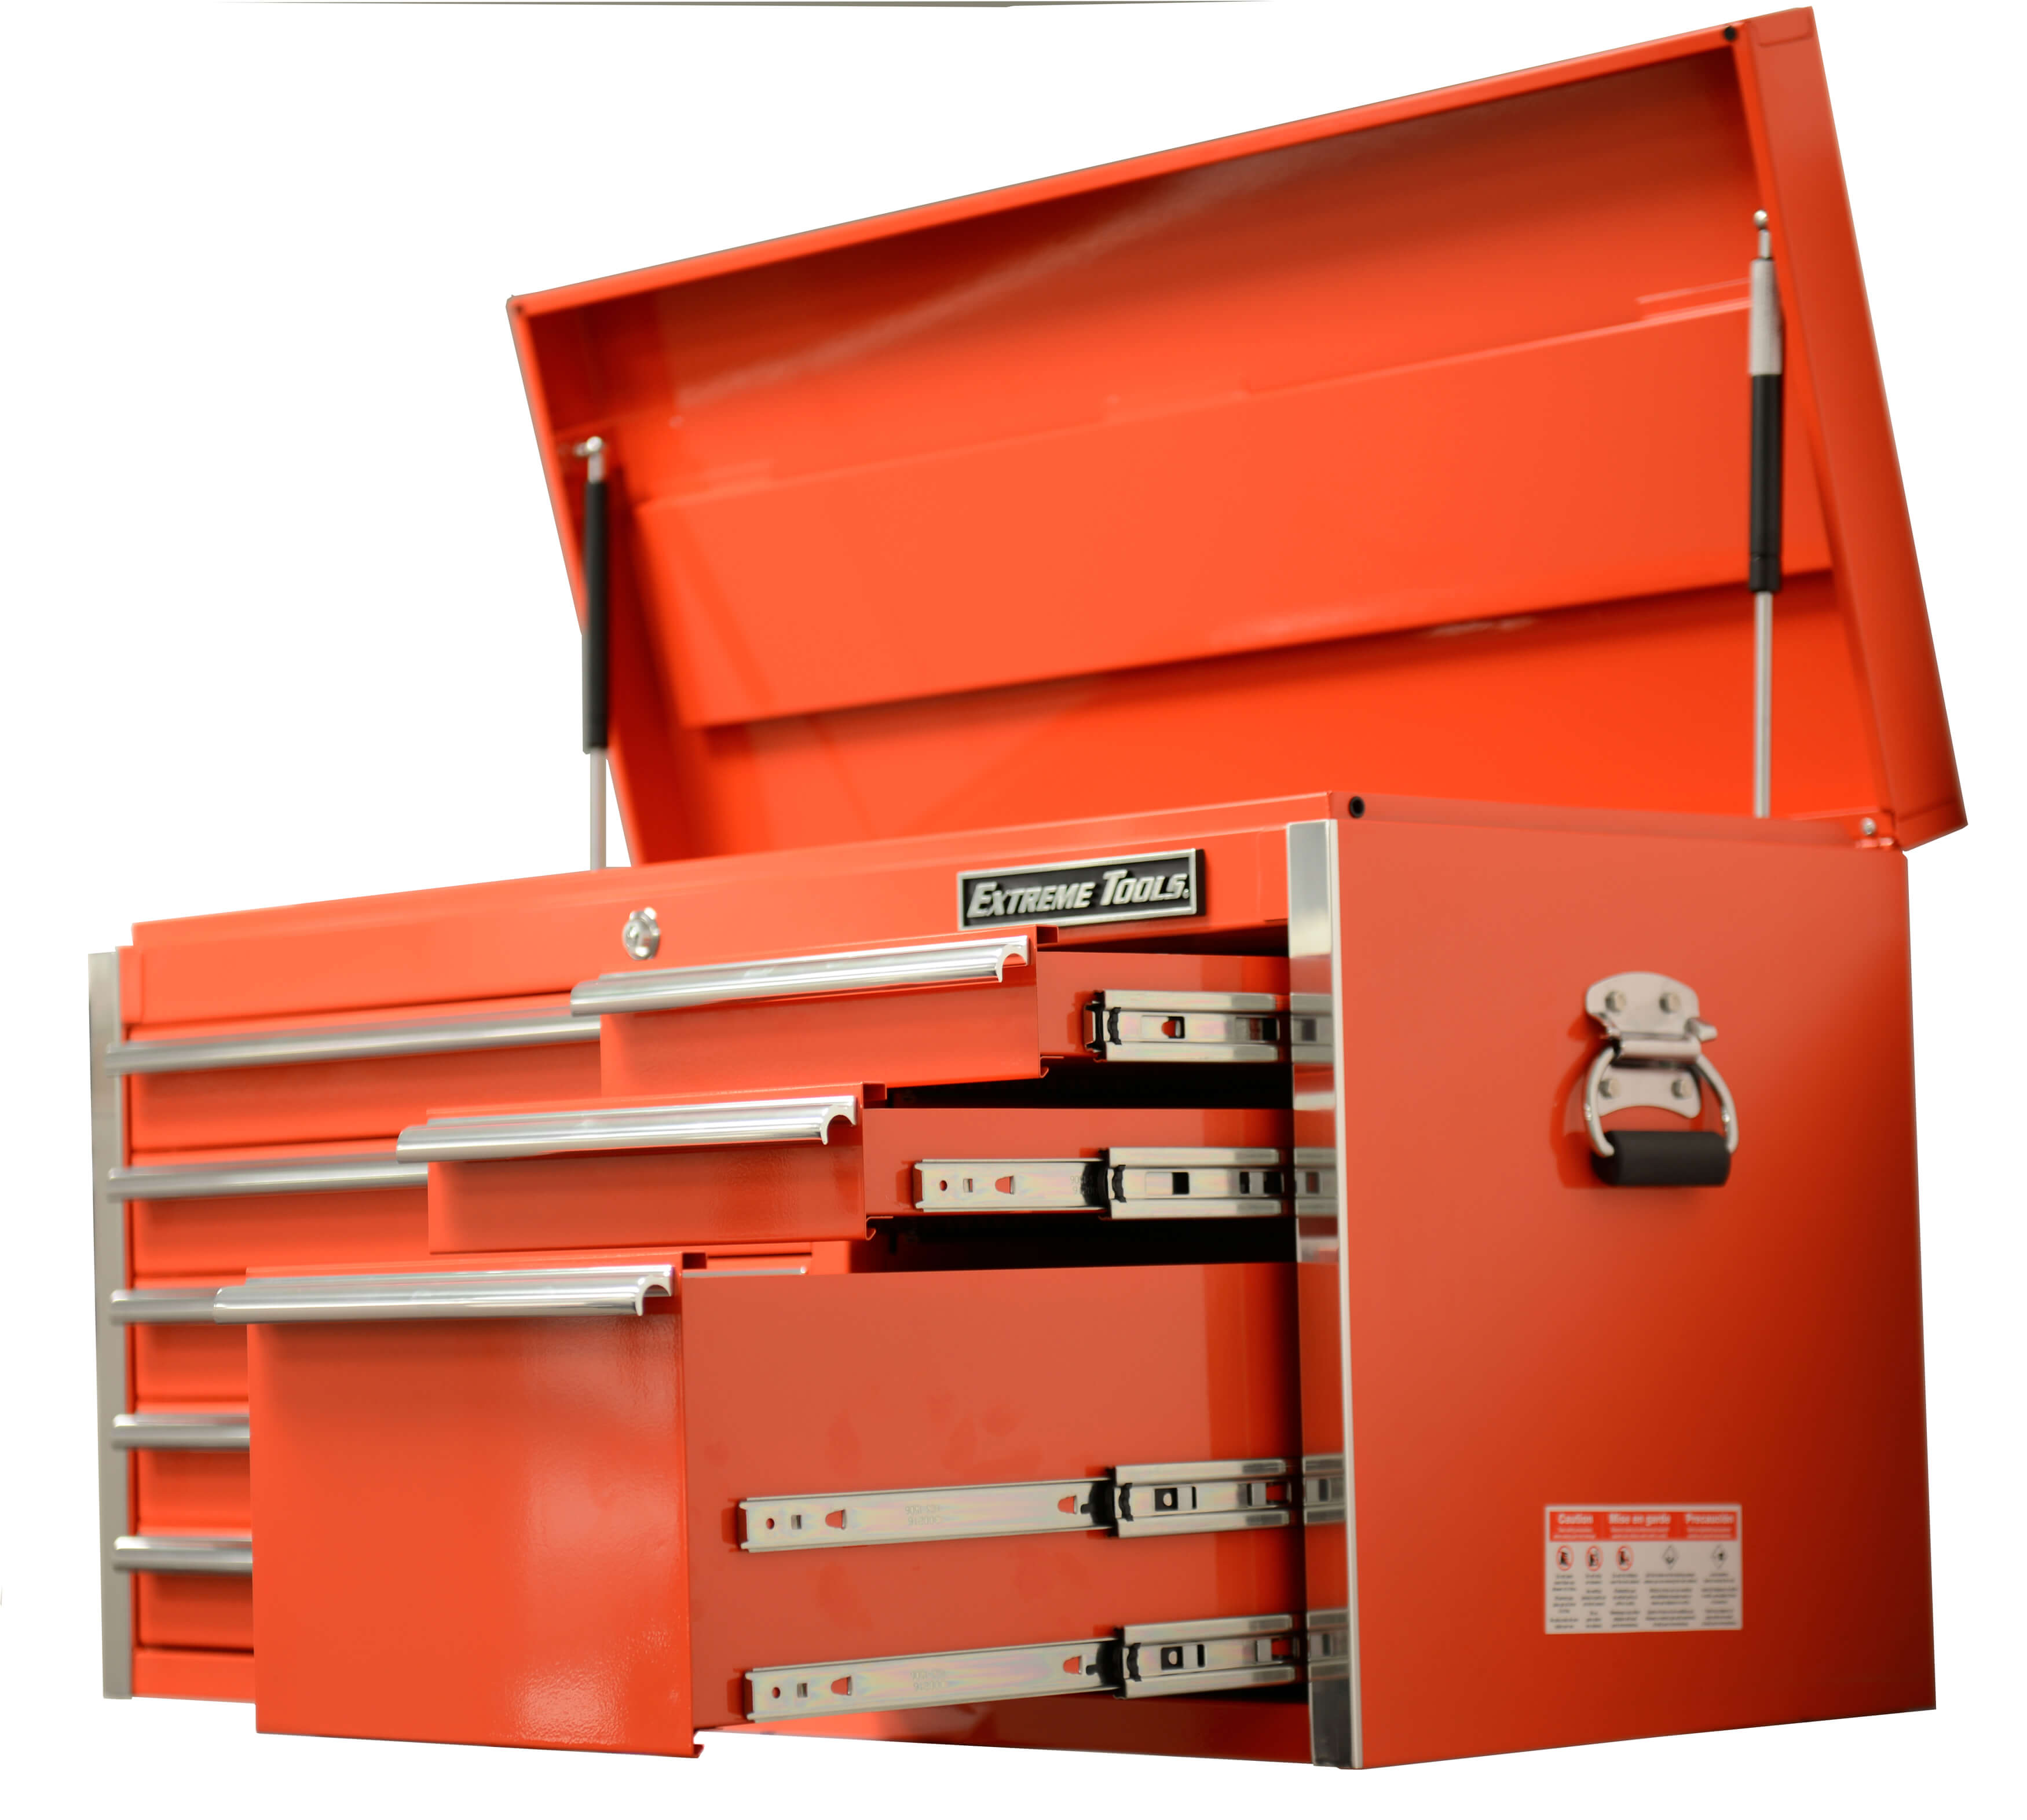 EXTREME TOOLS® 41 inch 8 DRAWER STANDARD TOOL CHEST